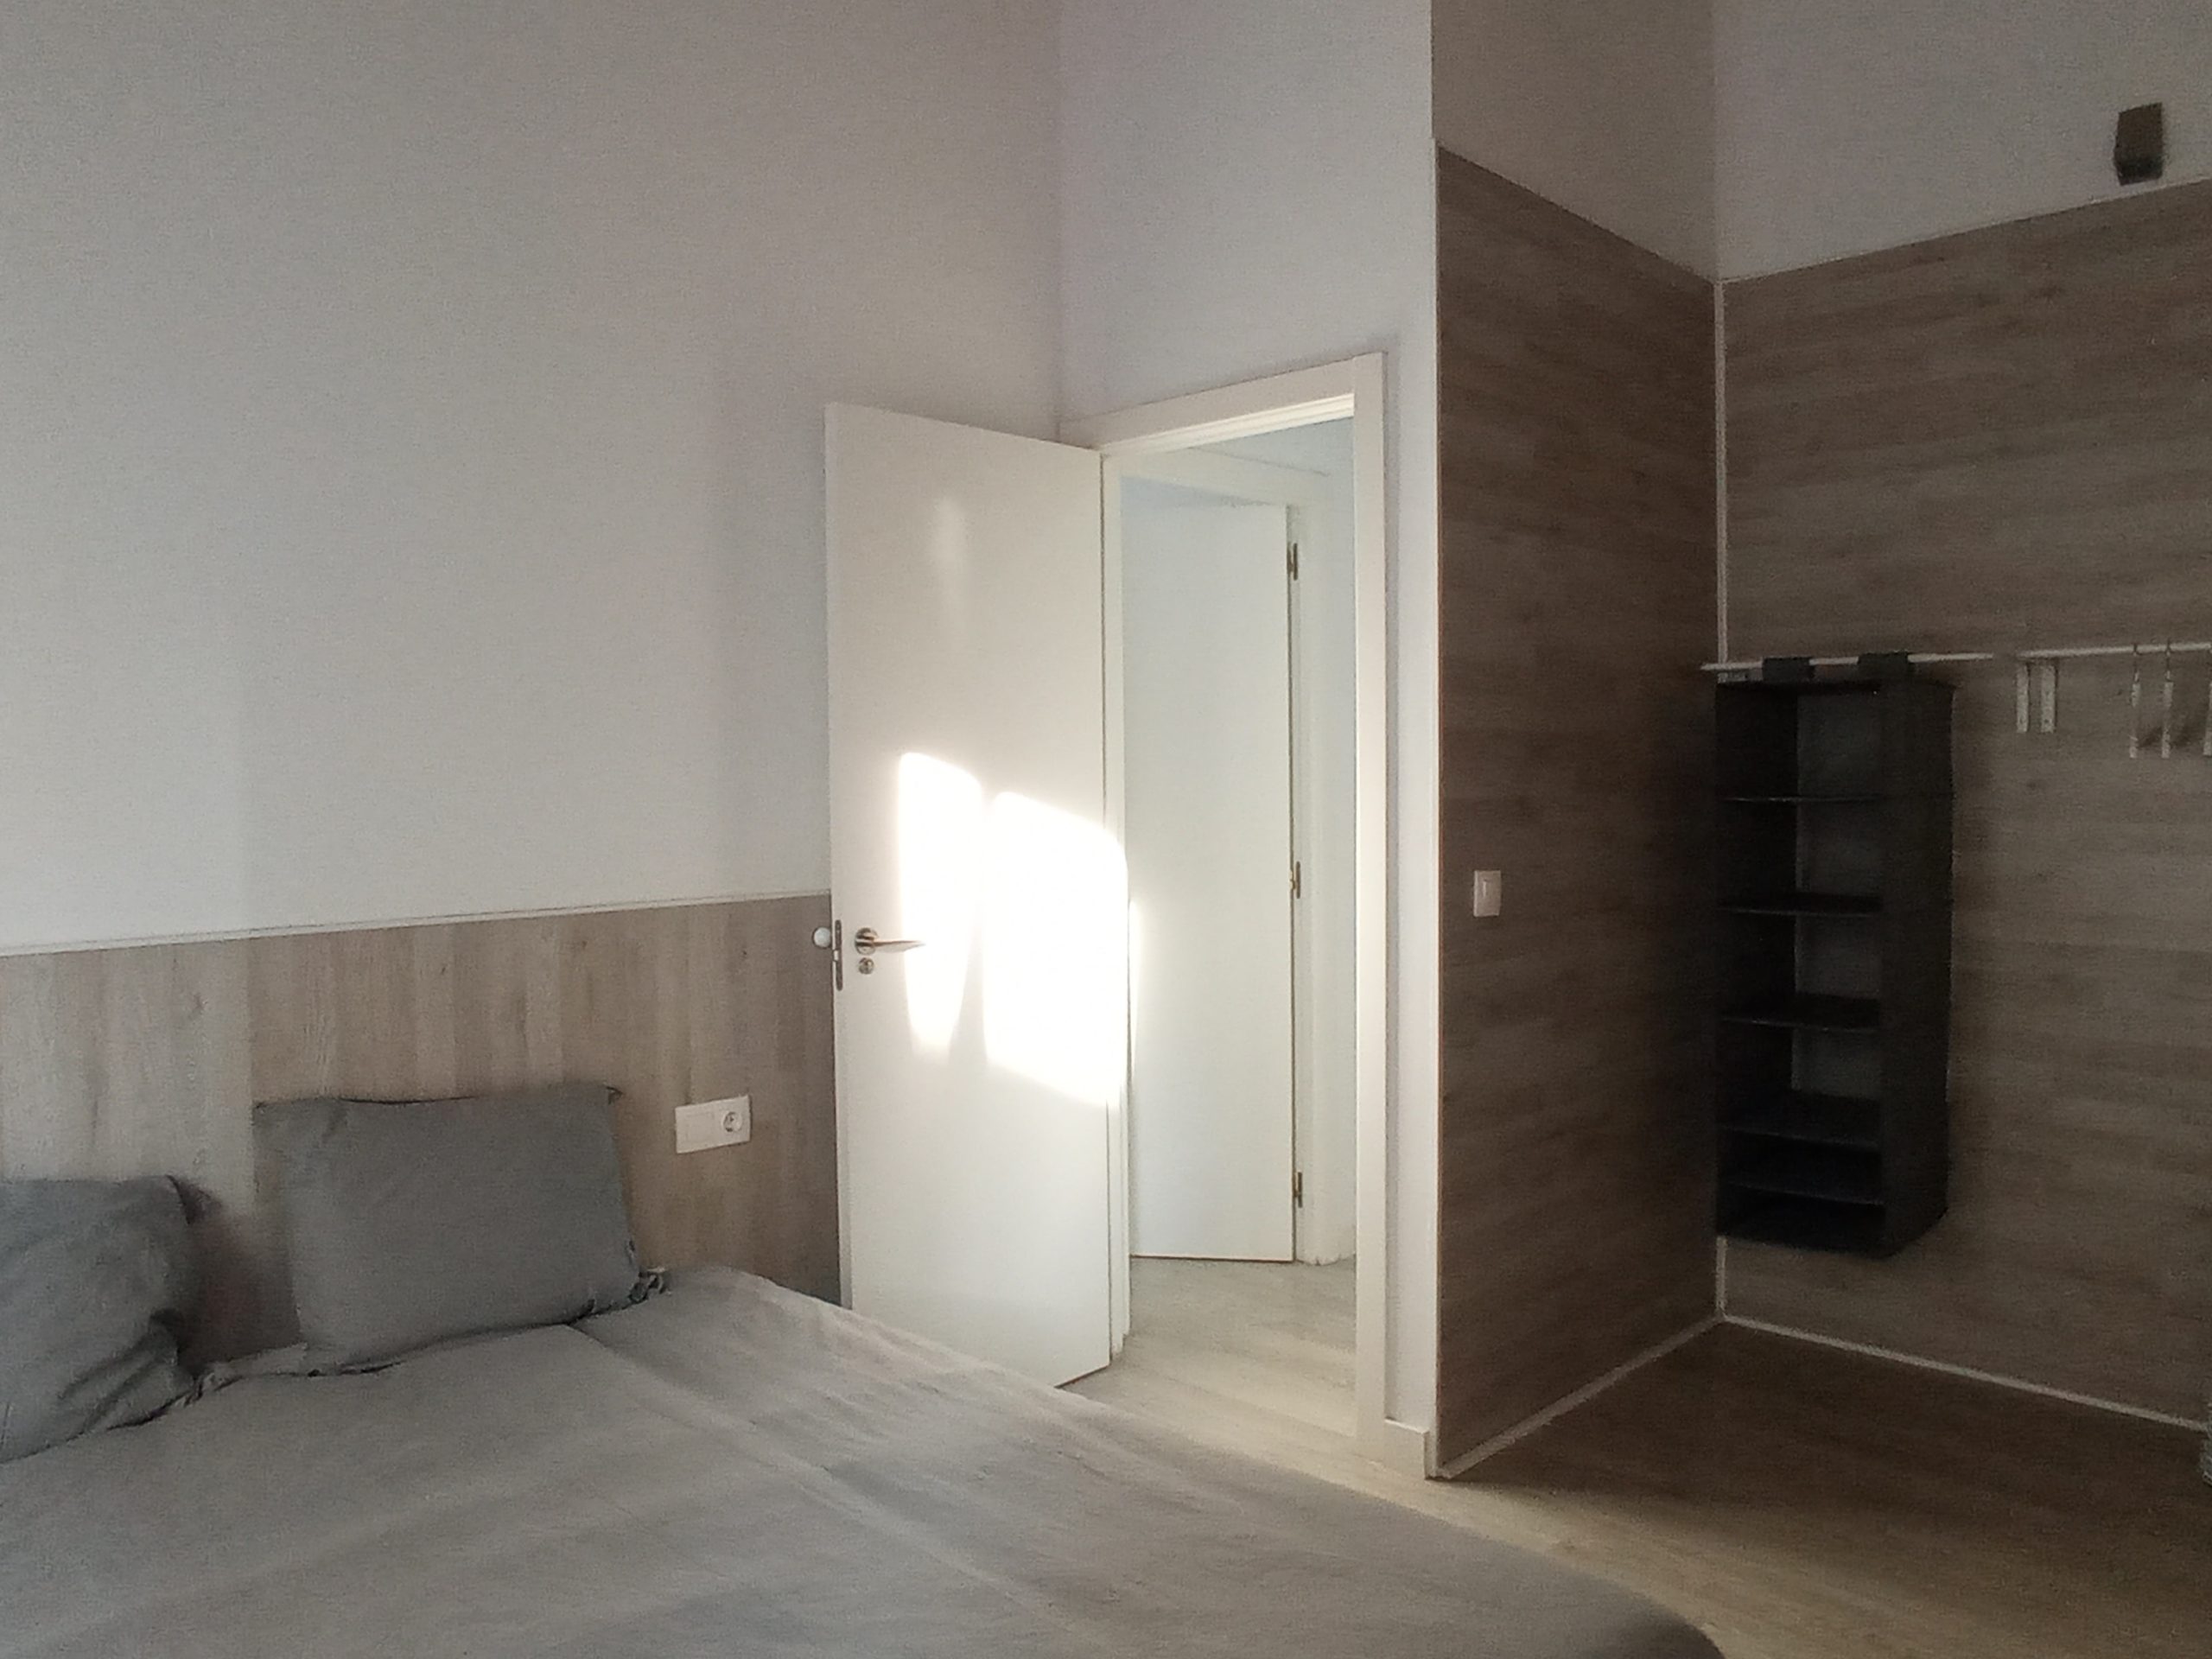 Vicente Lleo 2 - Expat apartment for rent in Valencia